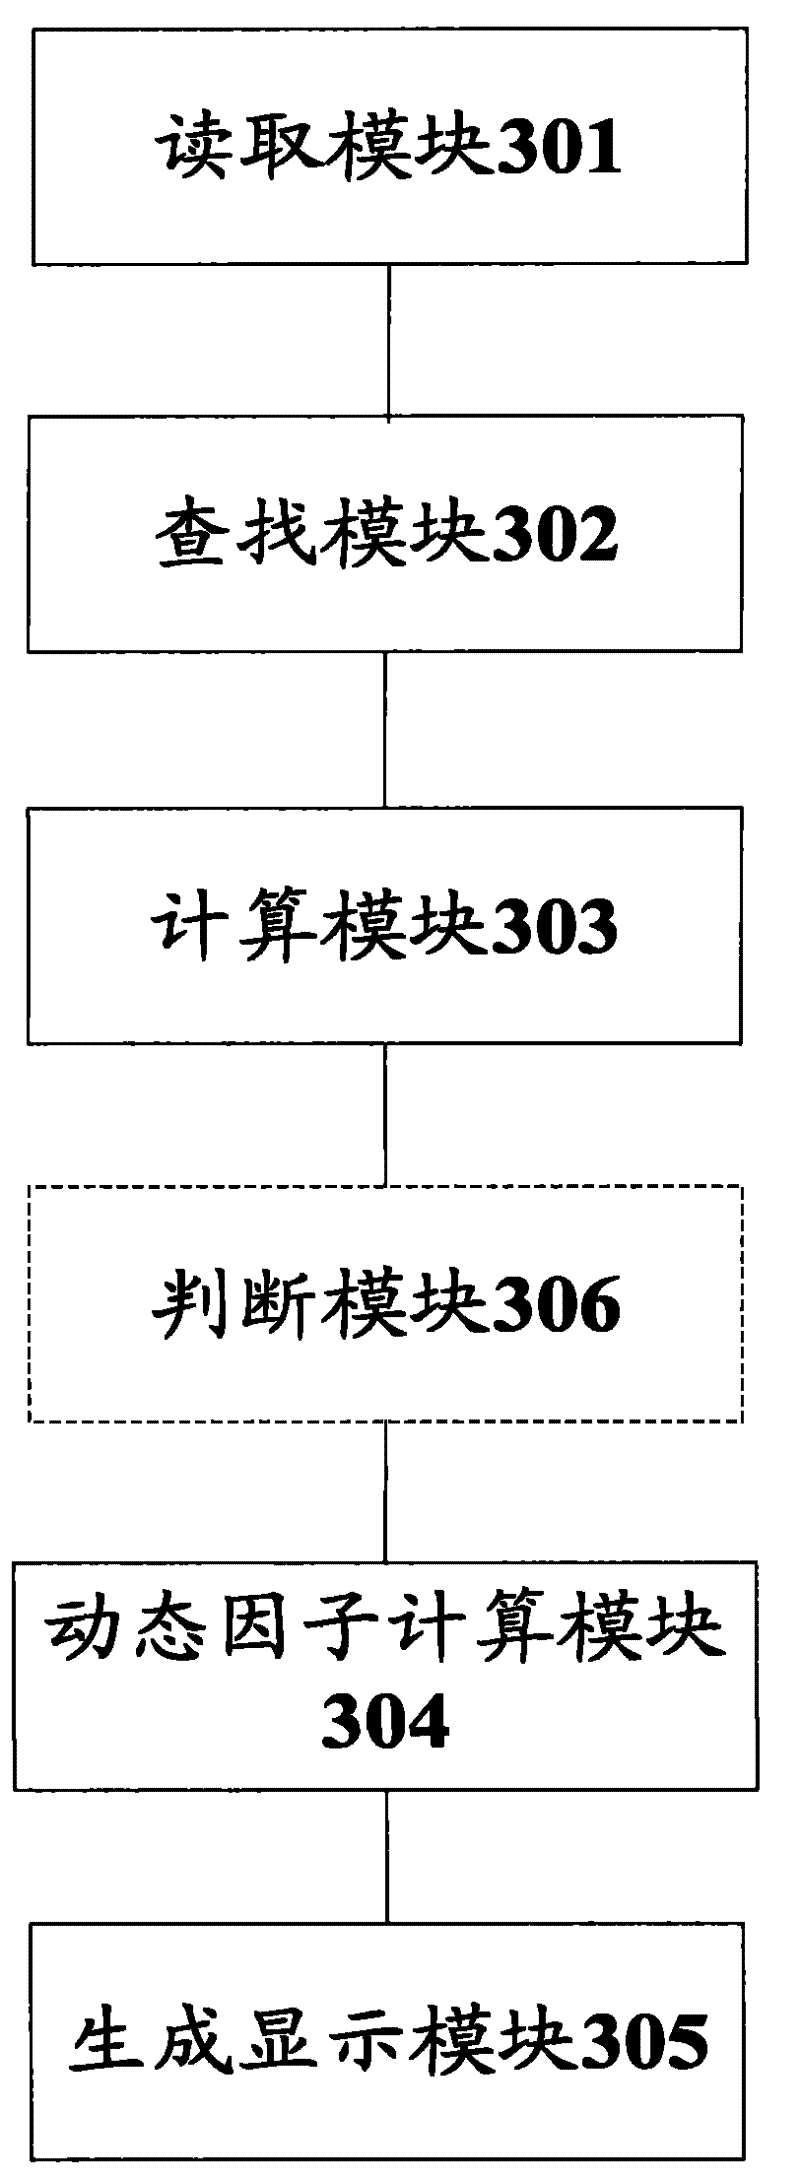 Method for processing time information and dynamic token